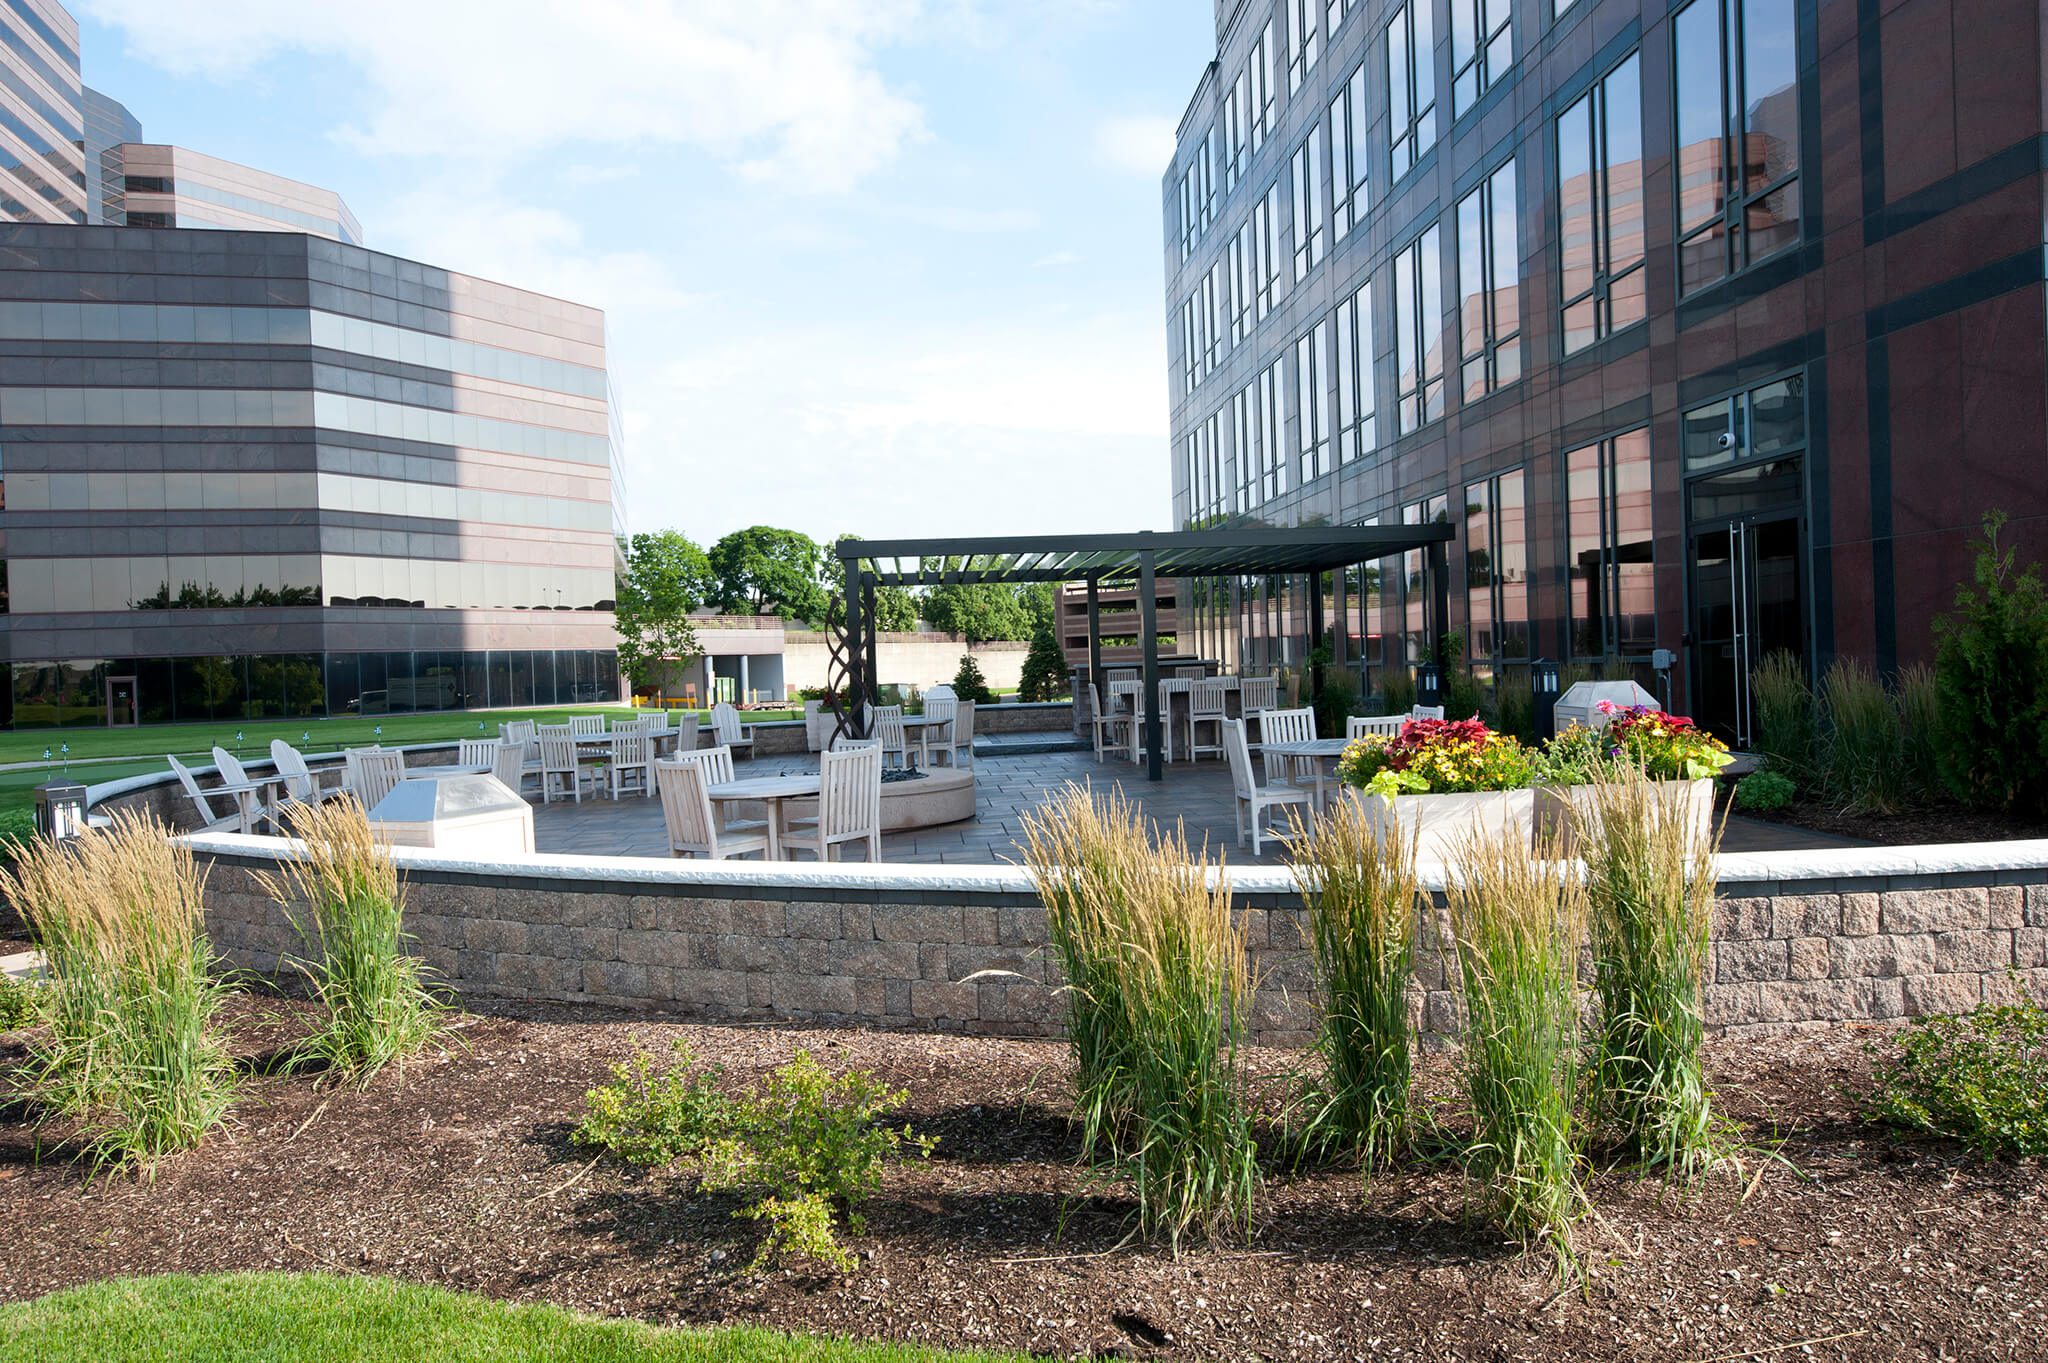 Commercial Outdoor Living Spaces Transforming St. Charles, IL